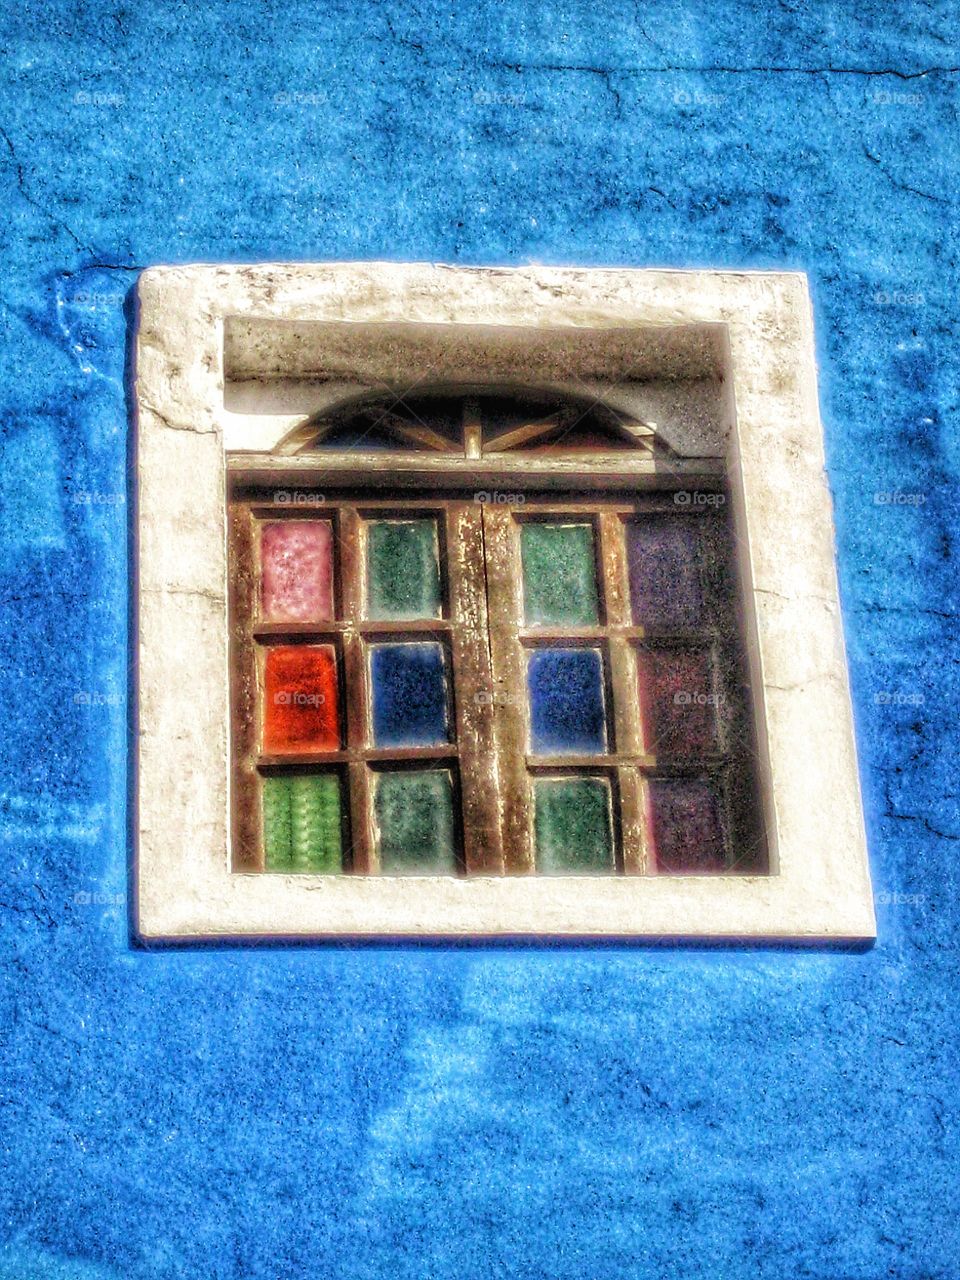 her image blue painted cement wall with colorful old stained glass window